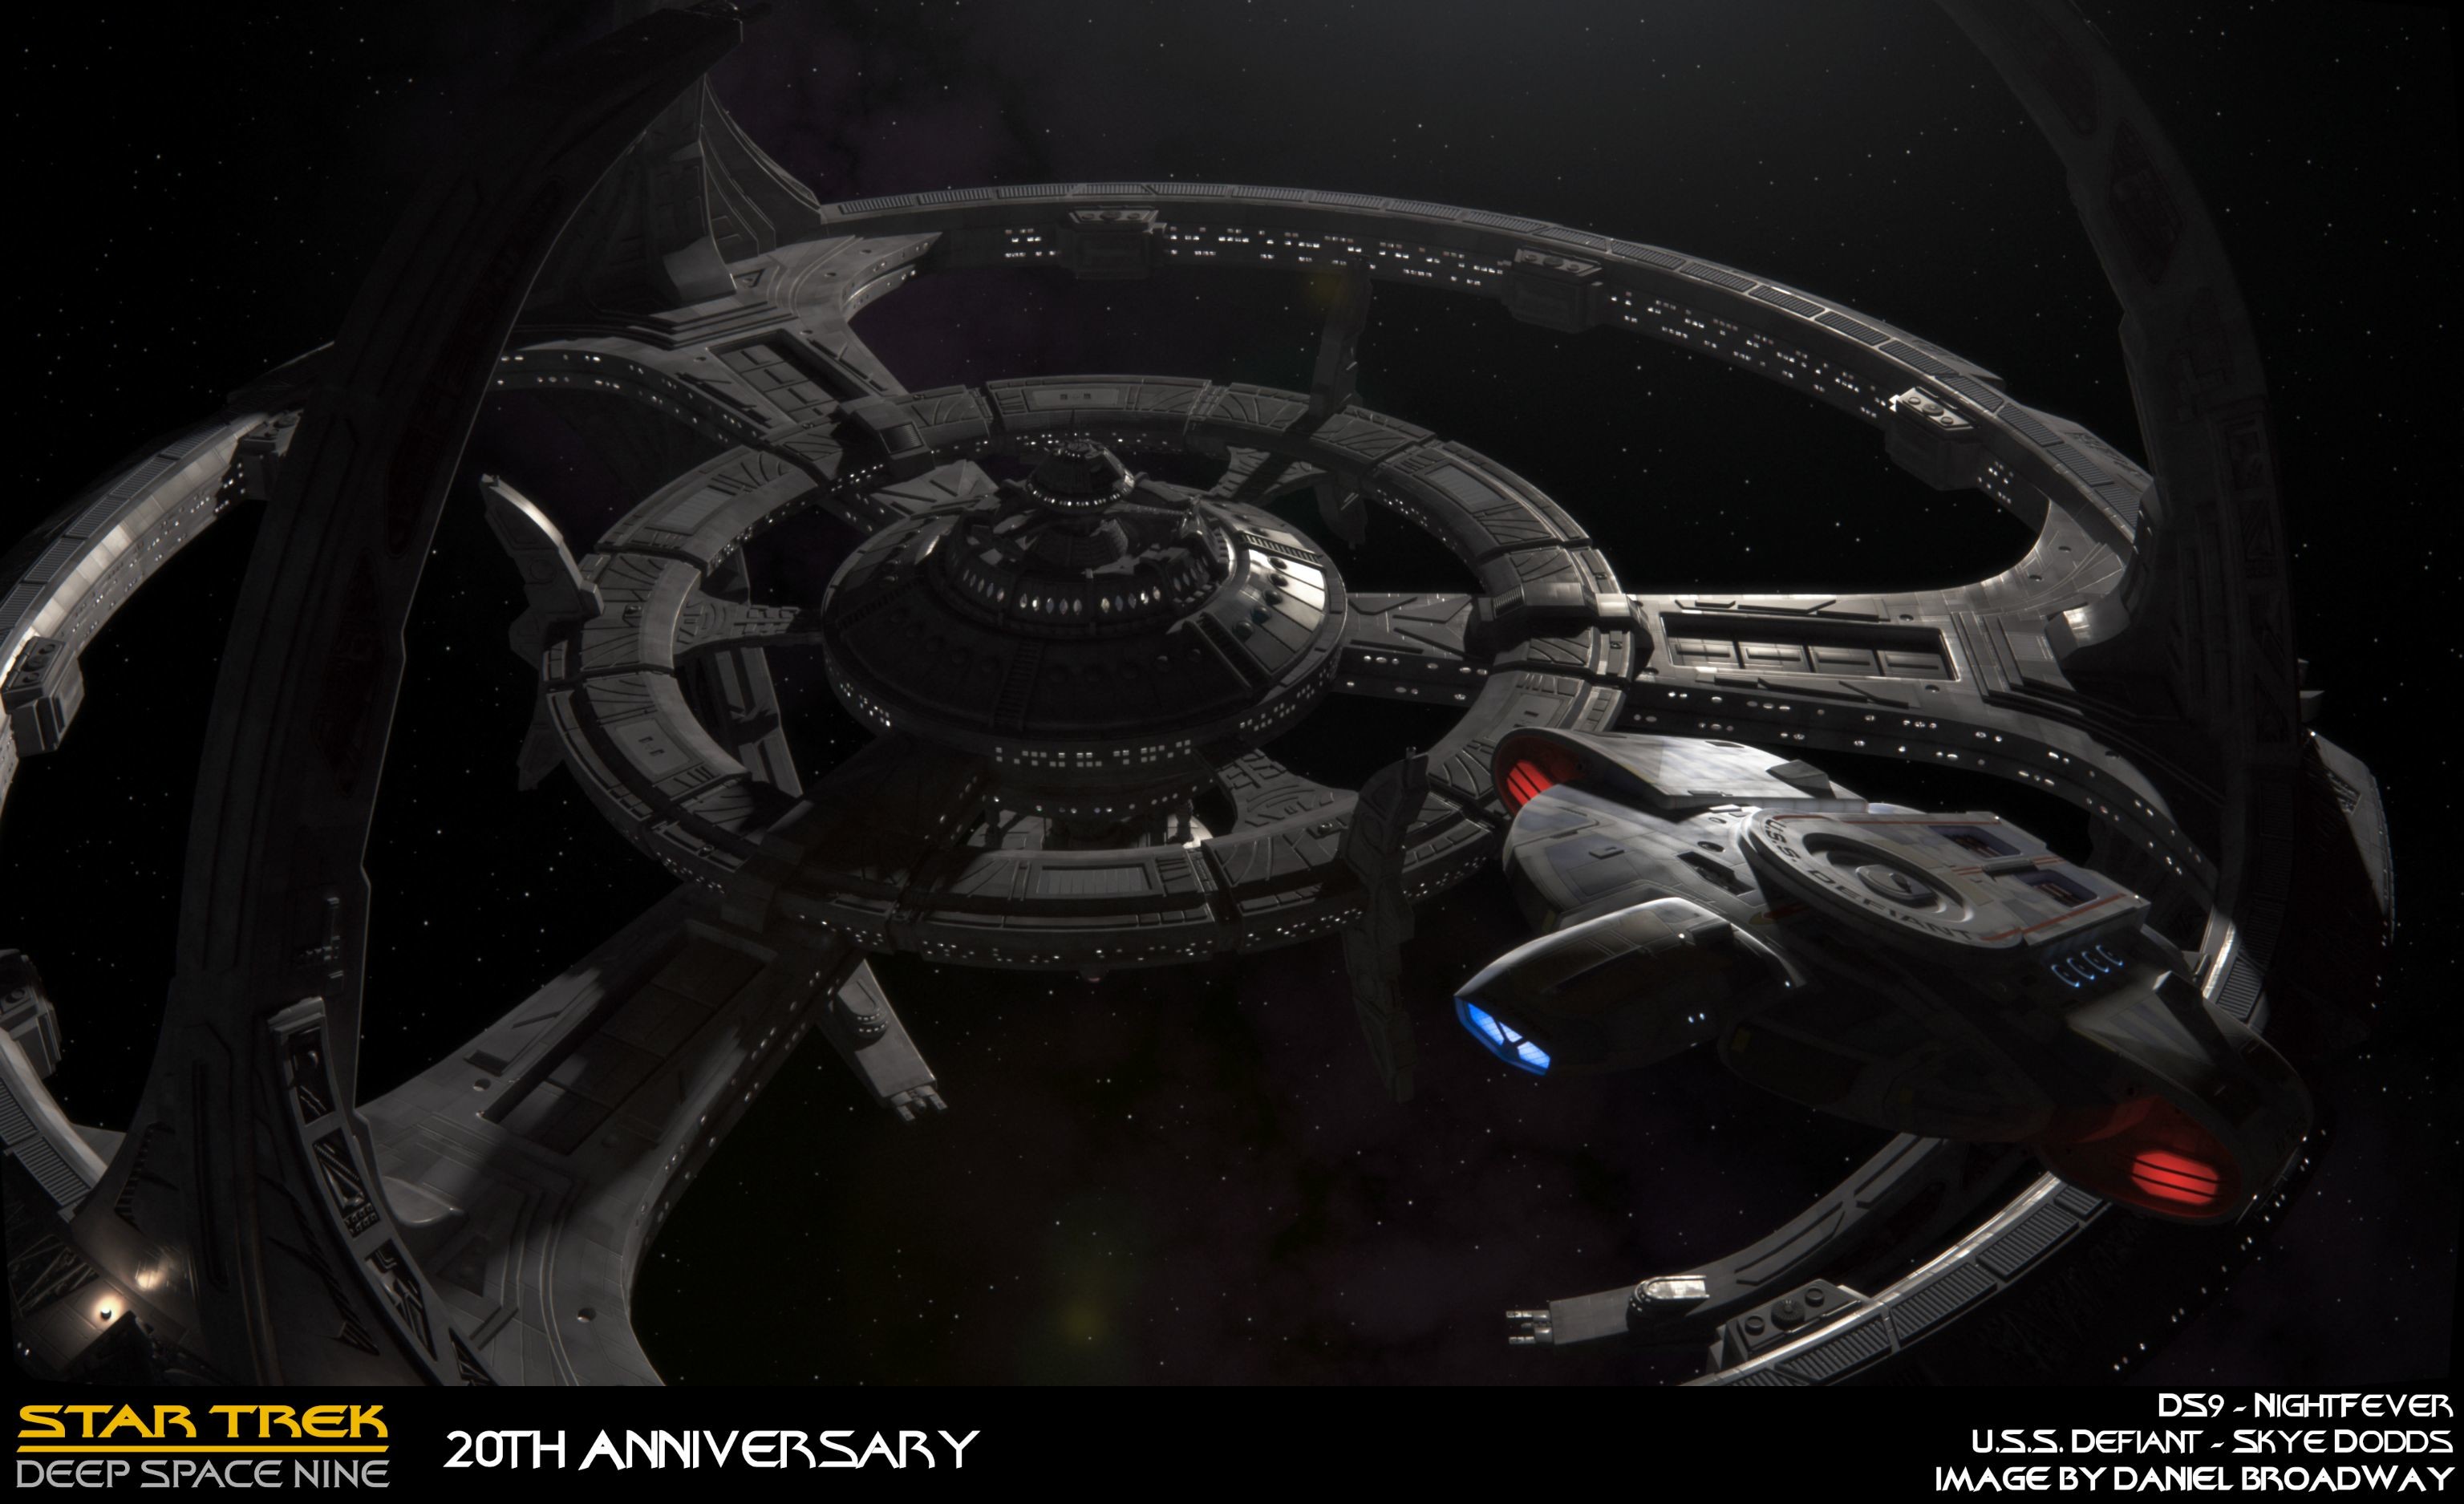 3072x1875 I never really watched DS9 much, but still I like the station design and  the Defiant. So I figured I'd do a render for DS9's 20th since I did TNG's  25th ...